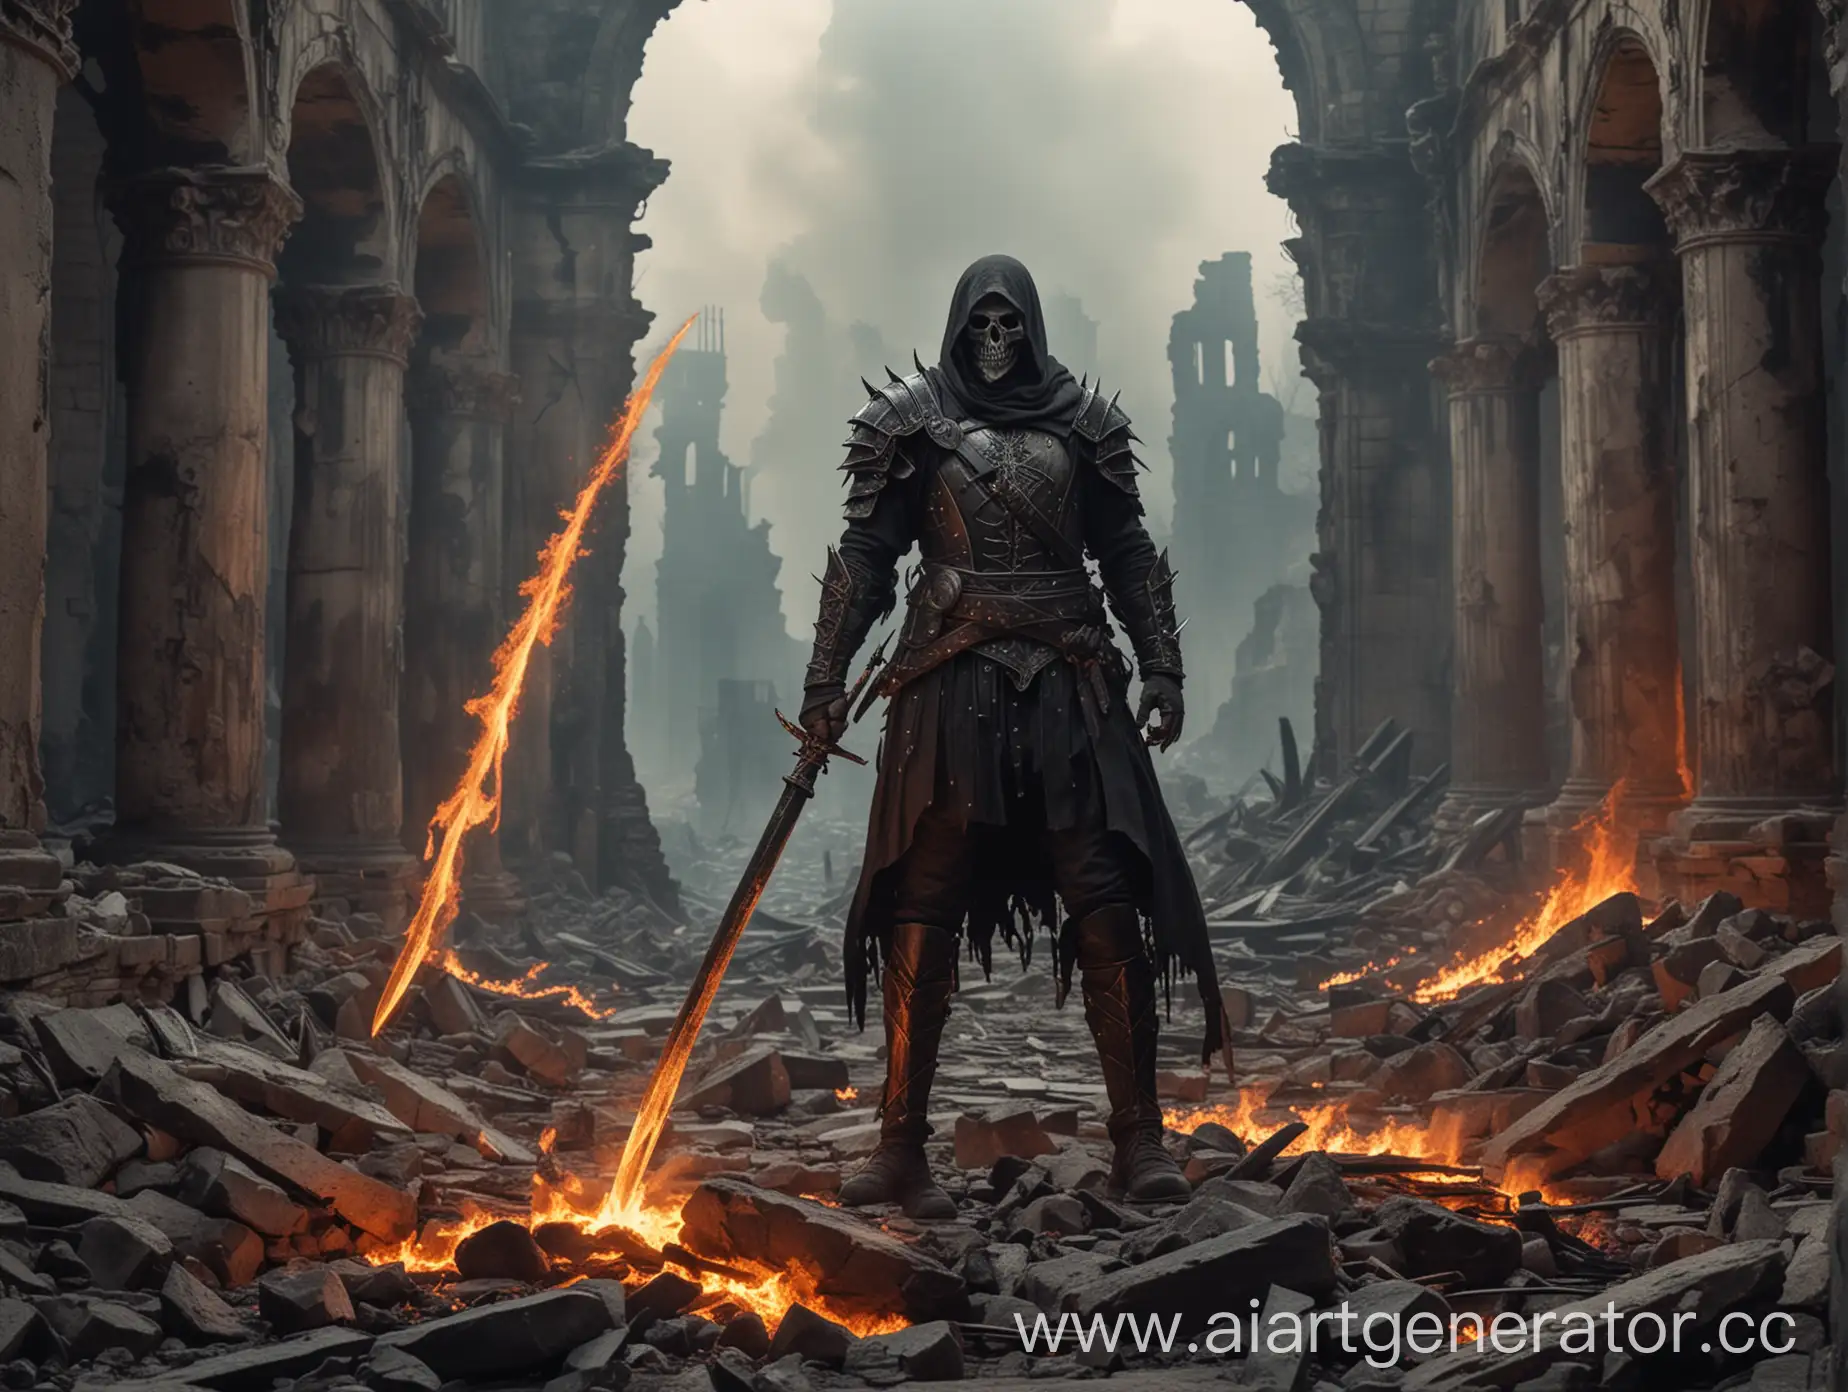 Fiery-Blade-Warrior-Stands-Amid-Old-World-Ruins